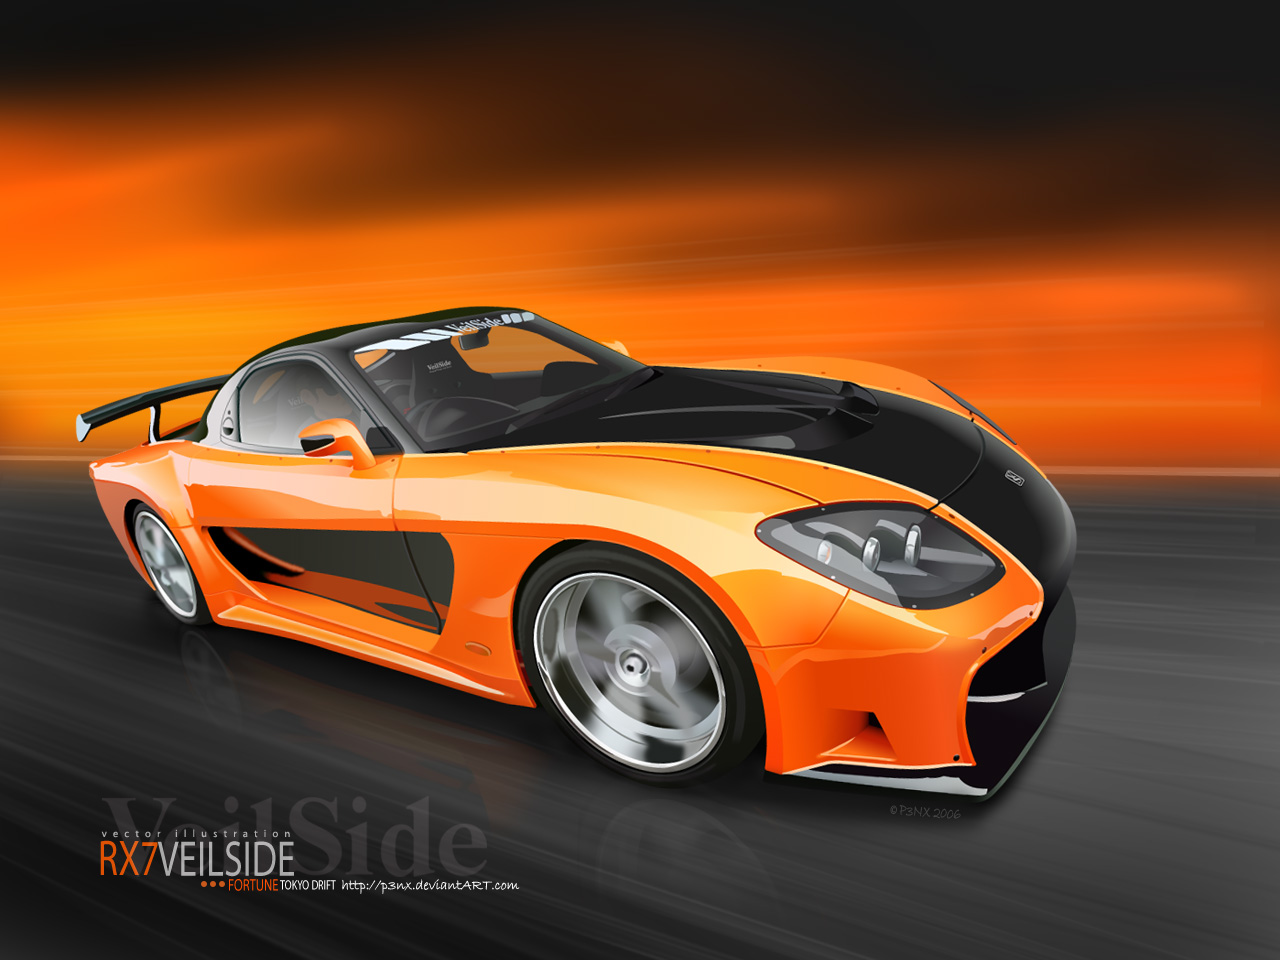 Veilside Fortune Rx7 Wallpaper By P3nx